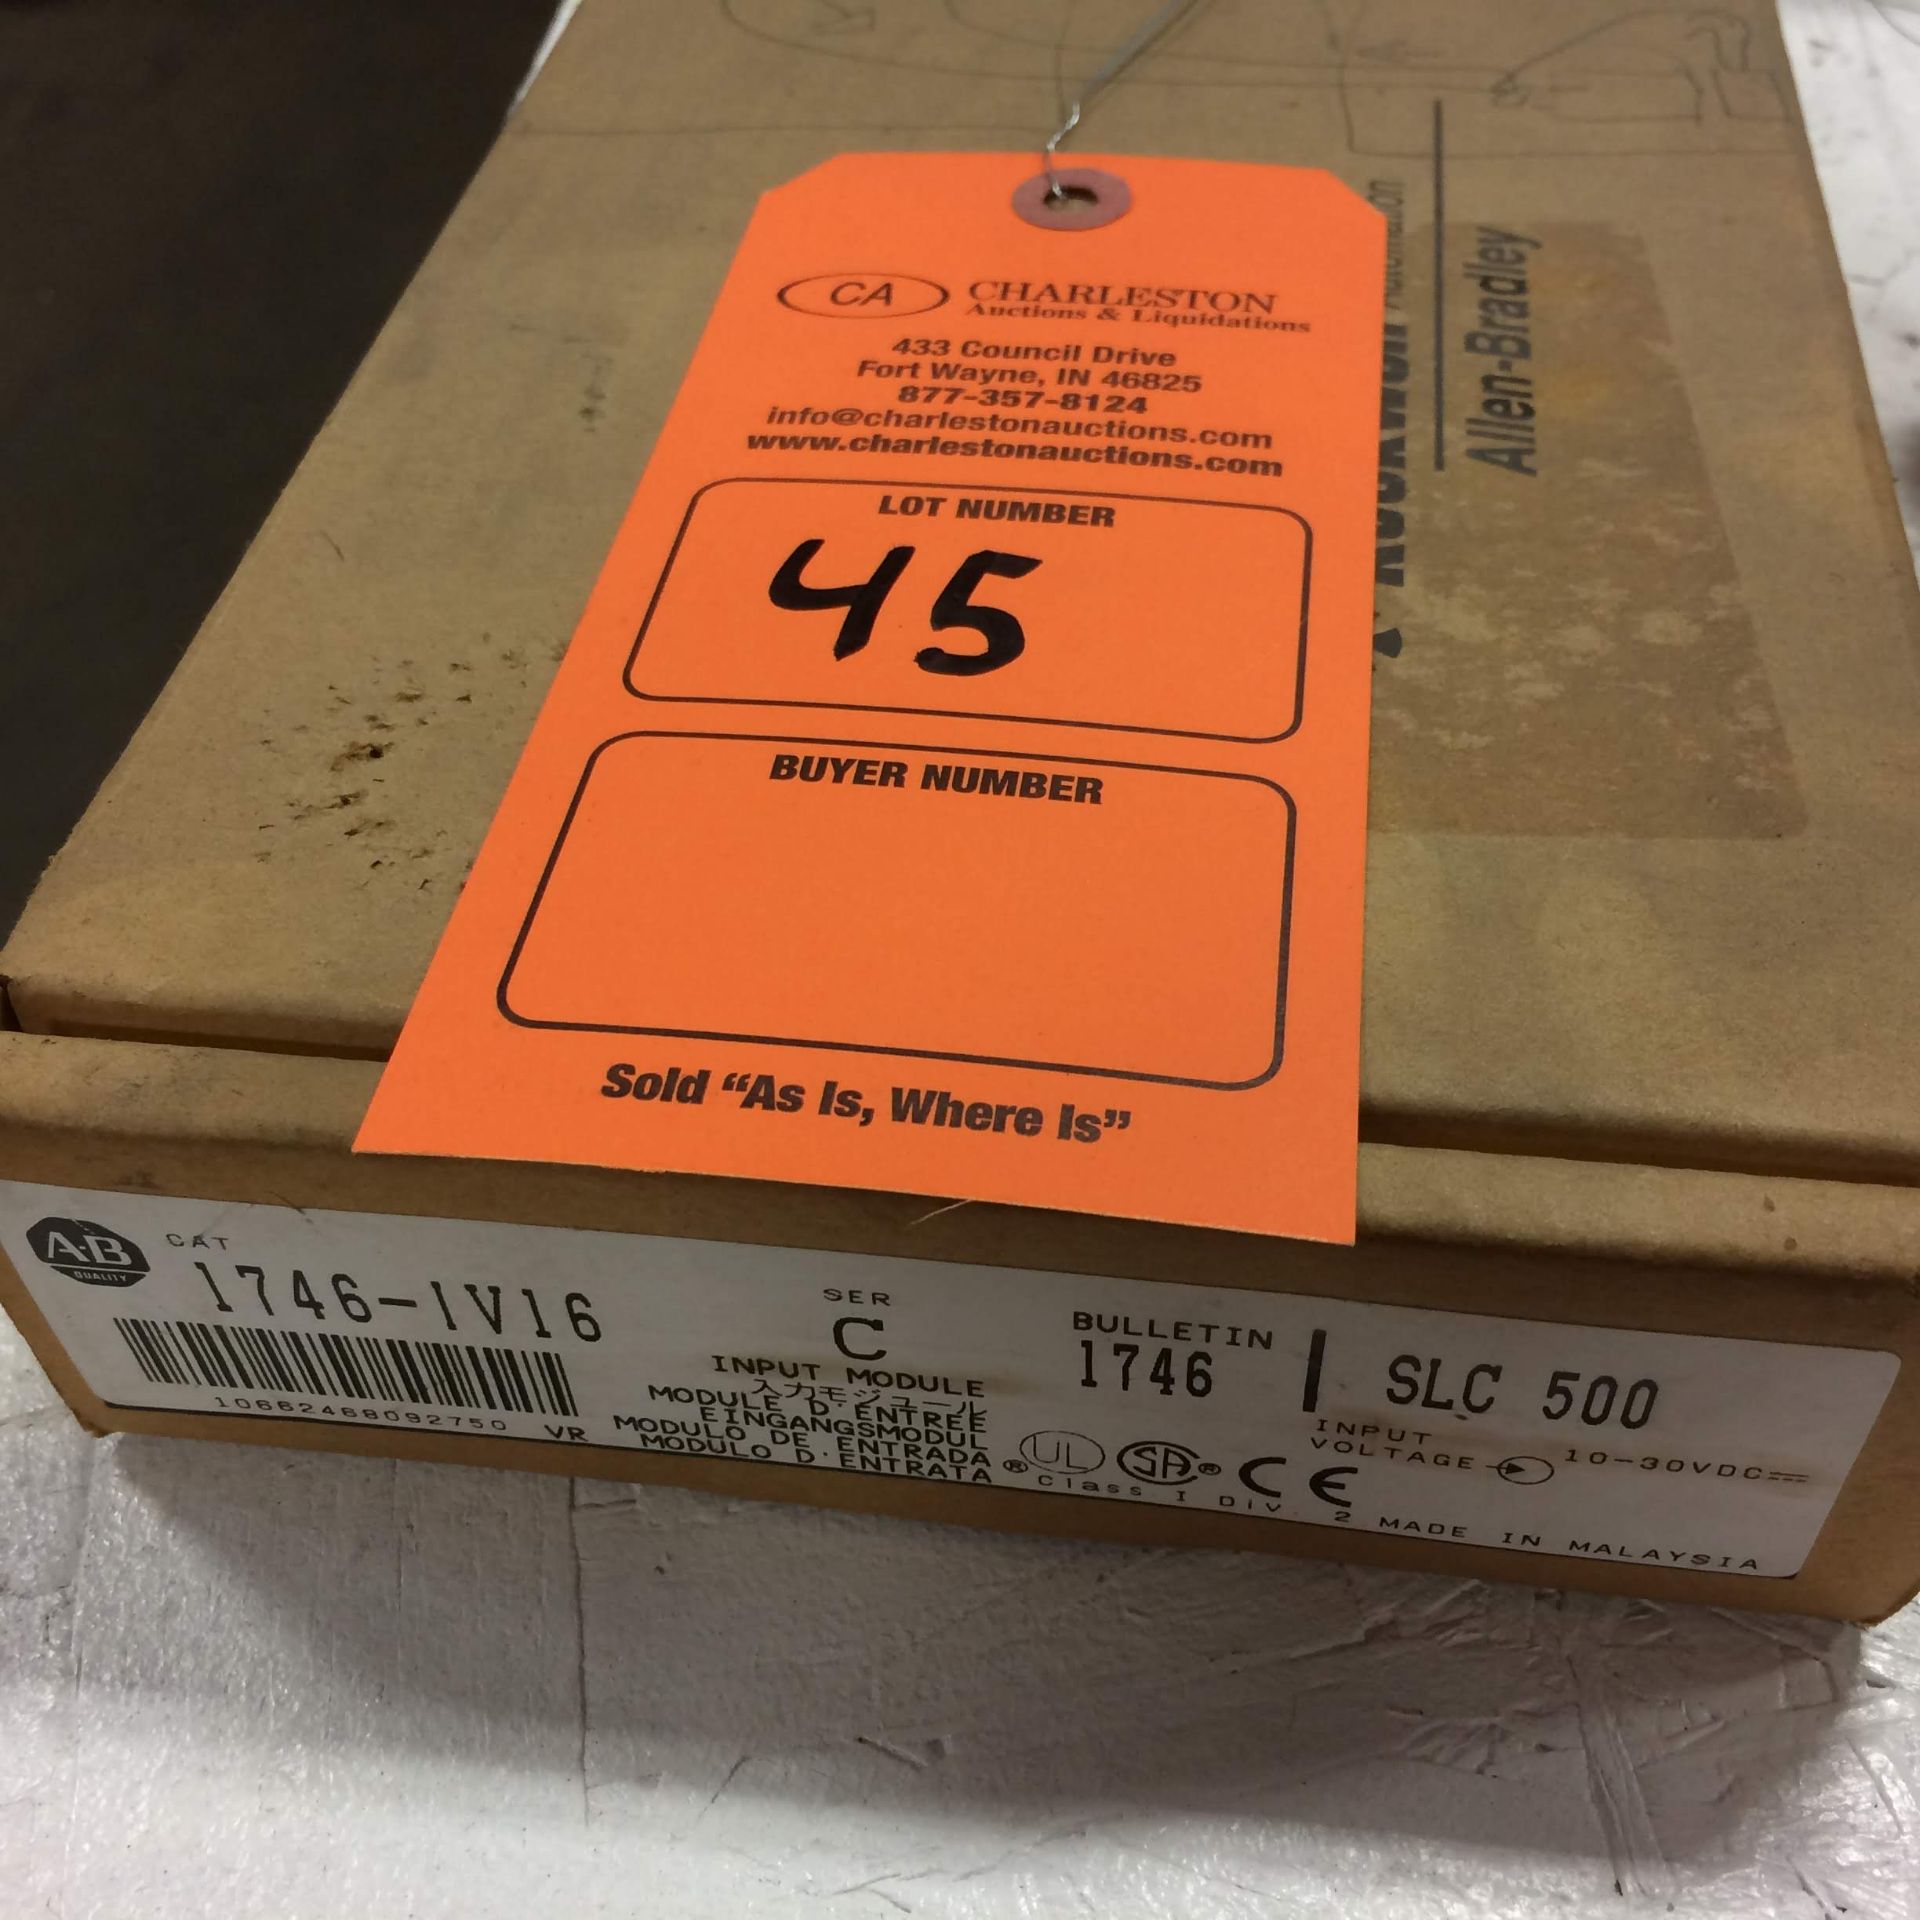 (1) 1746-IVI6 ALLEN BRADLEY INPUT MODULE NEW. Pickup your lot(s) for free! Shipping is available for - Image 2 of 4